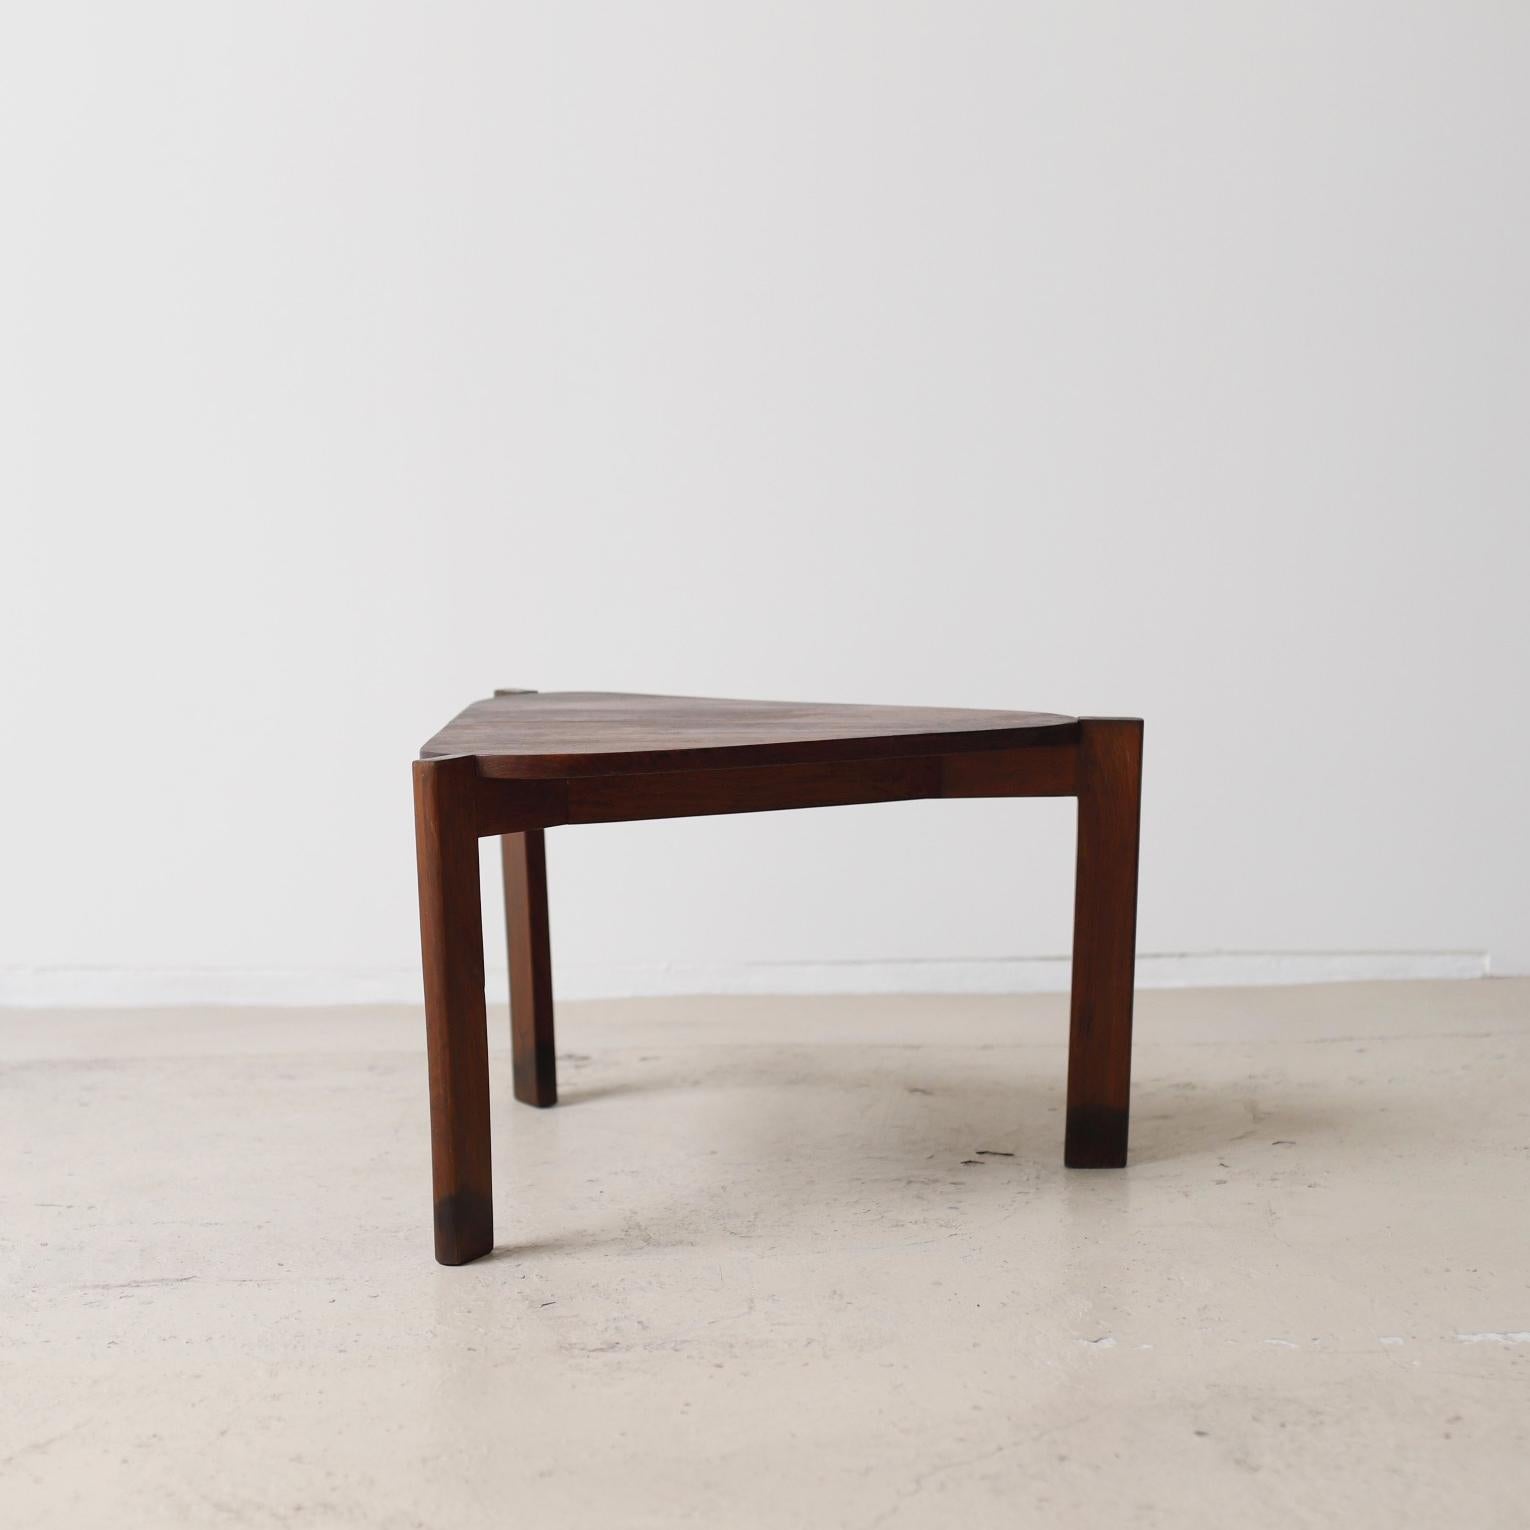 A coffee table designed by Pierre Jeanneret for various buildings in the city of Chandigarh in the midcentury.